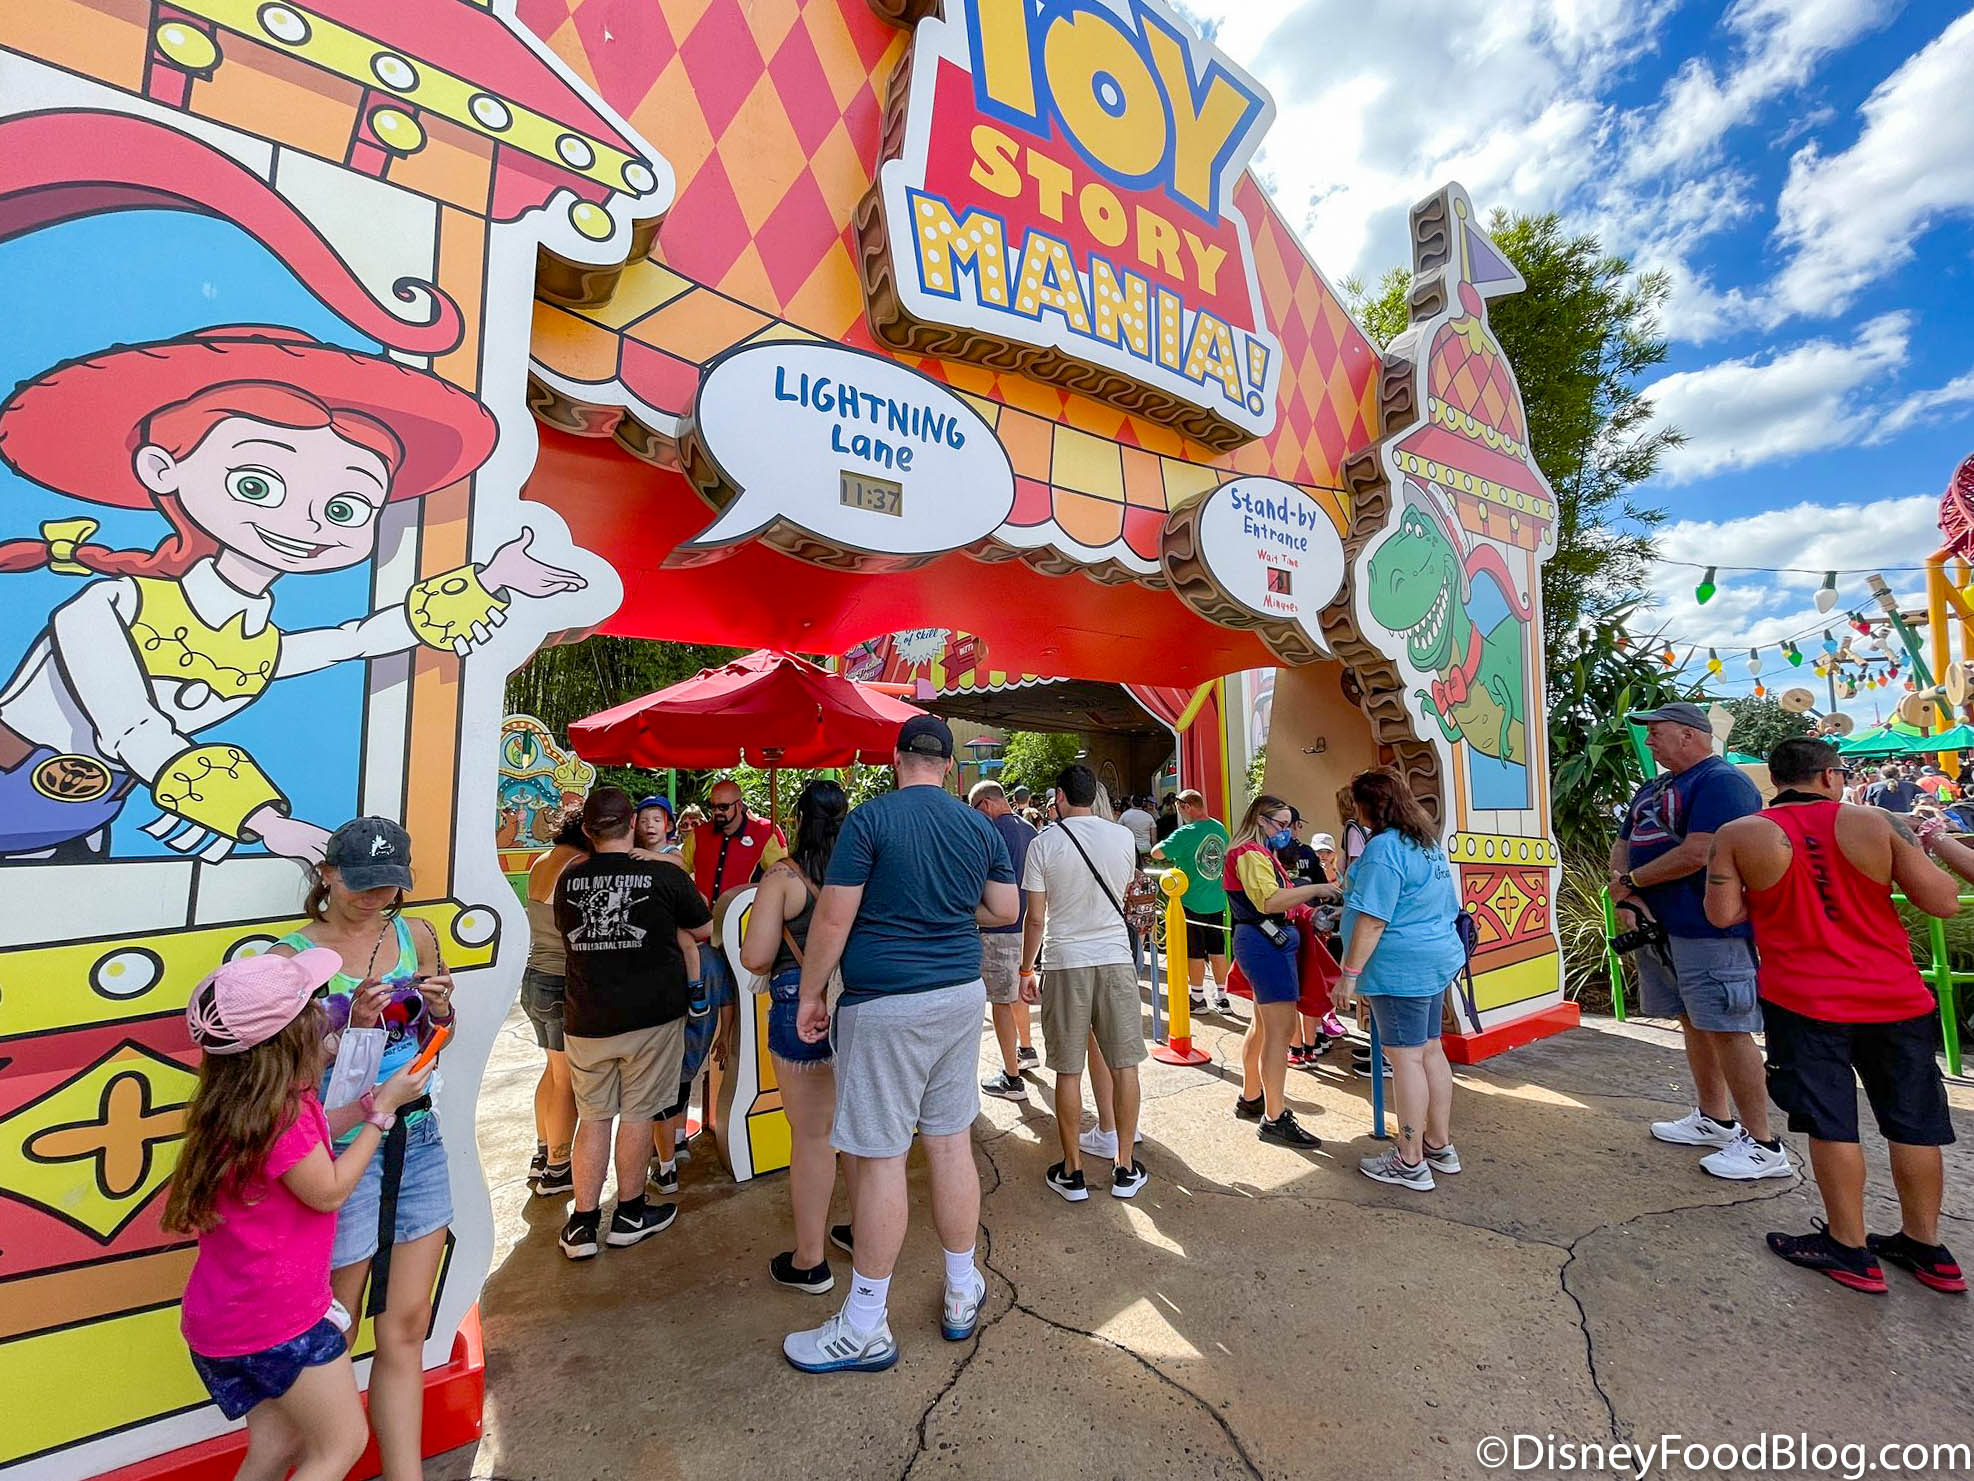 Skip the Line: 8 Ways to Get Ahead at Orlando Parks and Rides